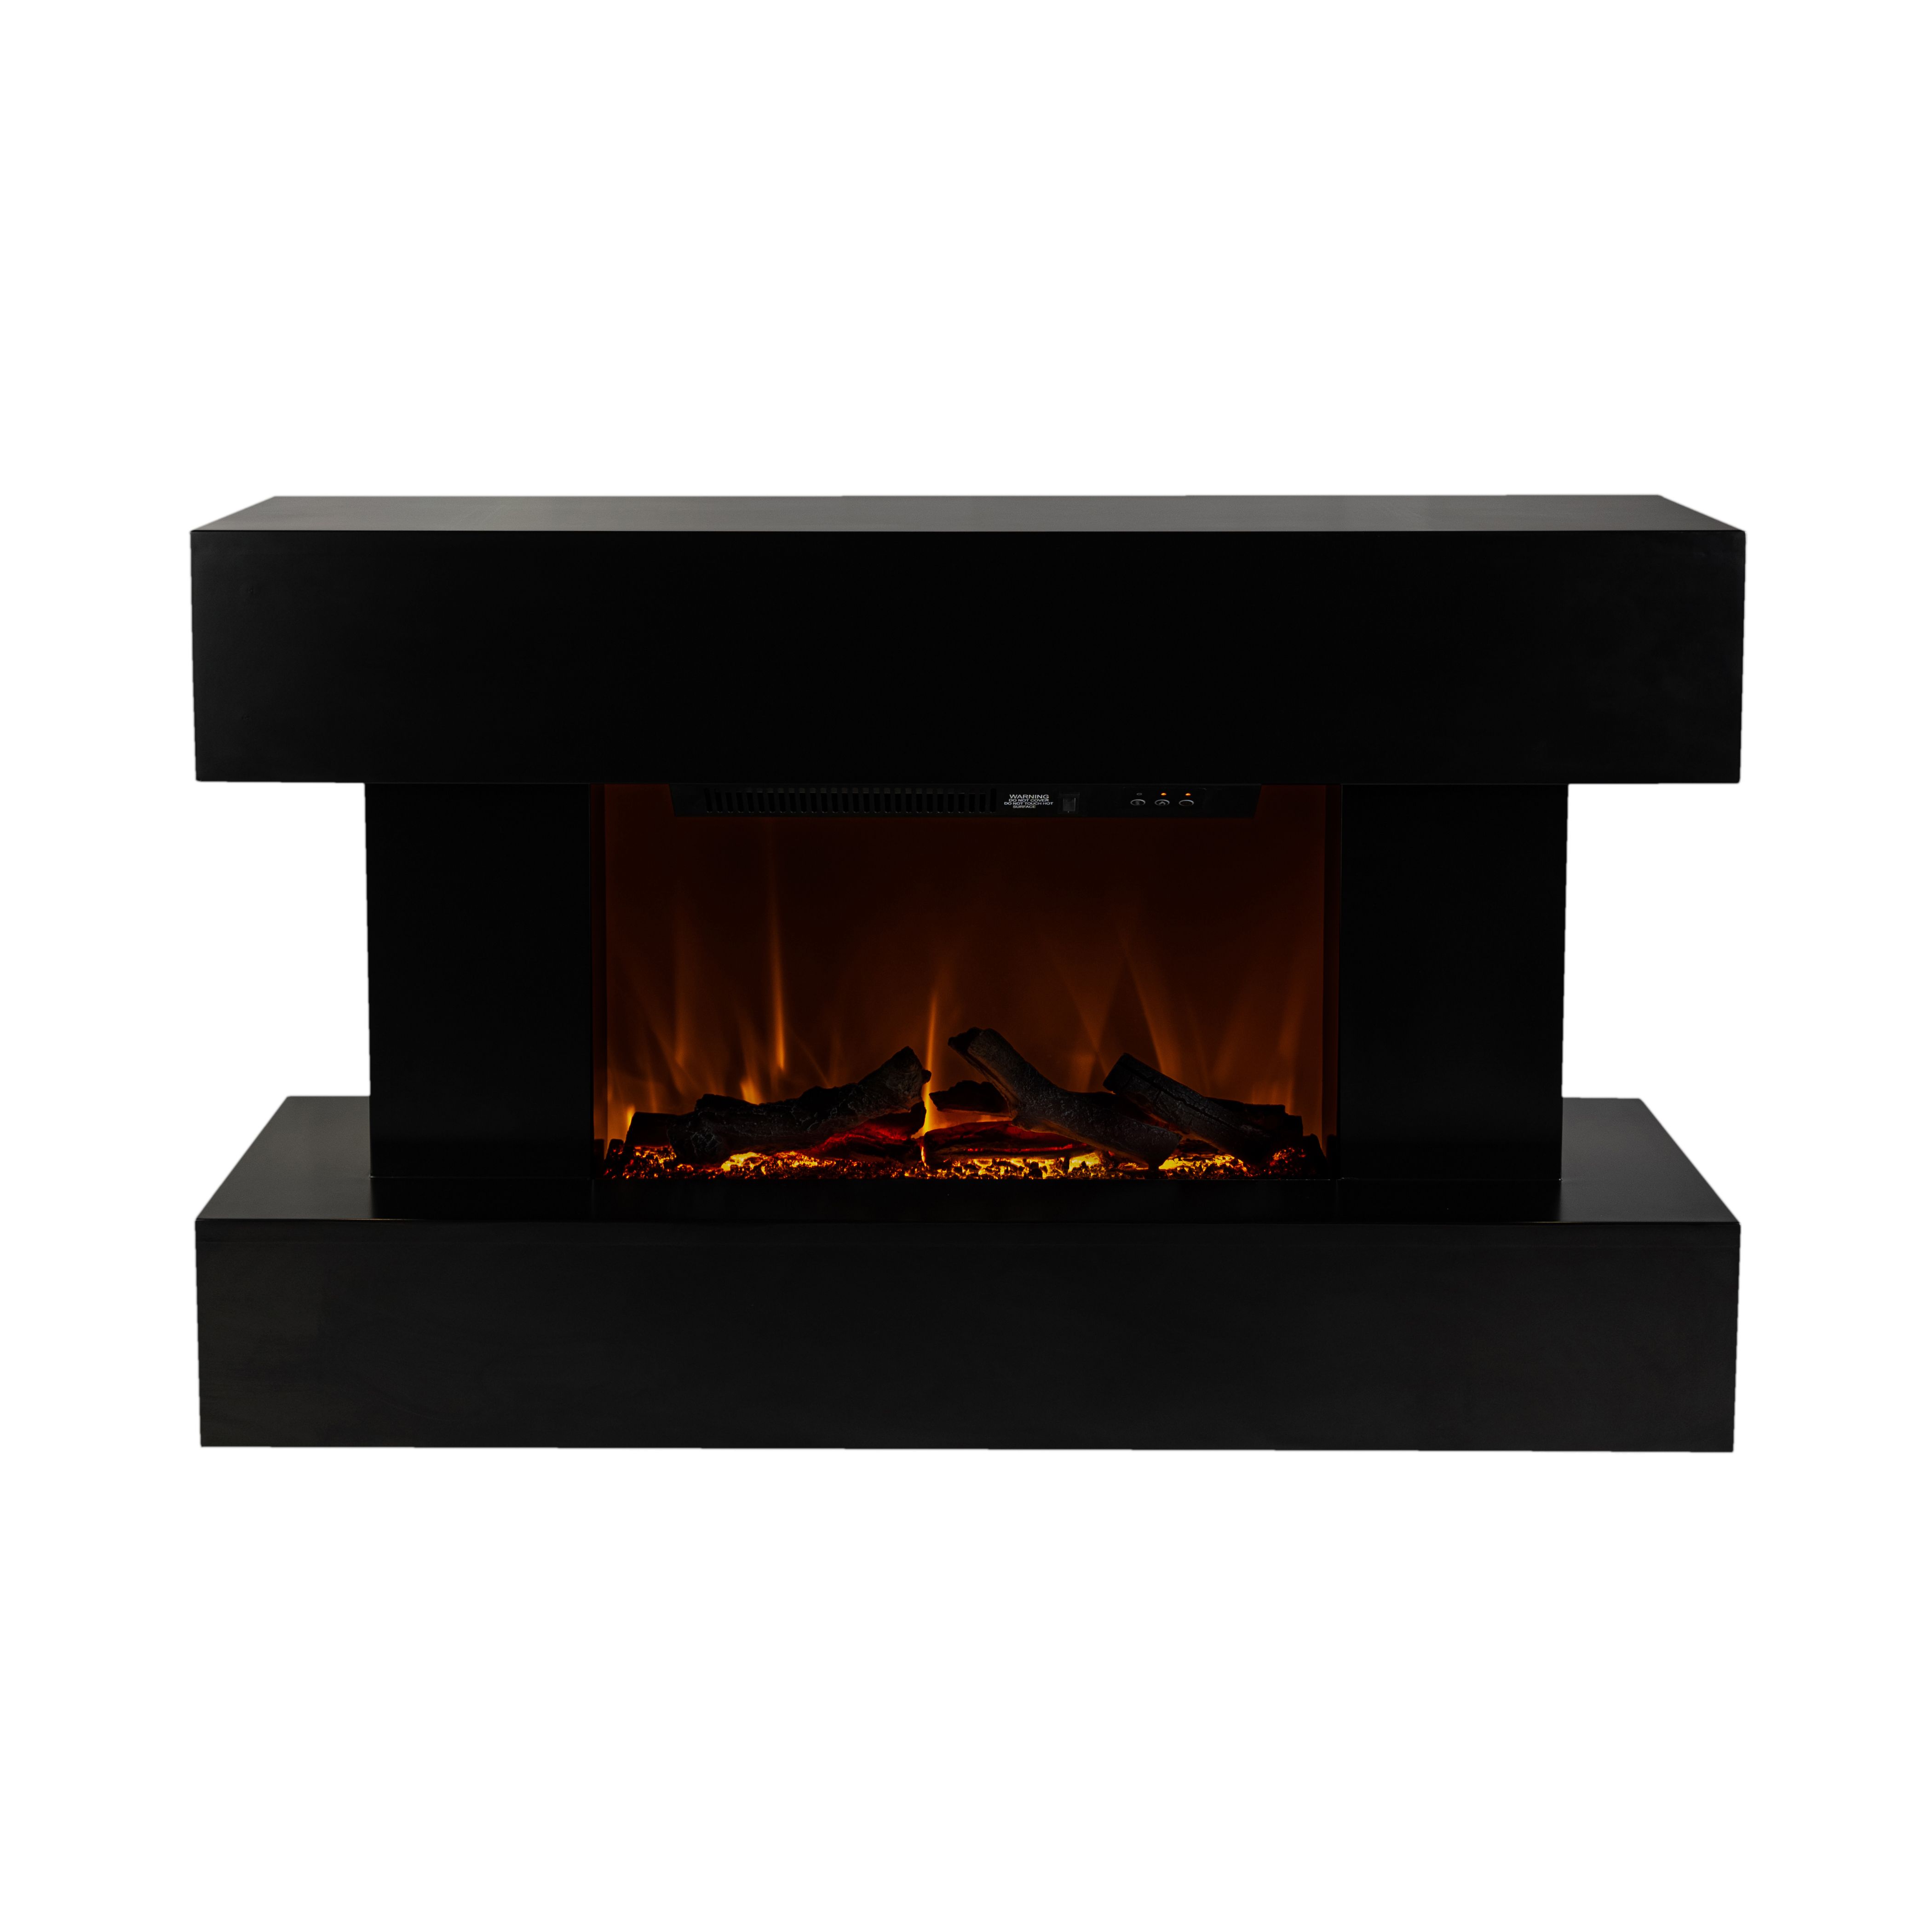 Focal Point Rivenhall 2kW Gloss Black Electric Fire